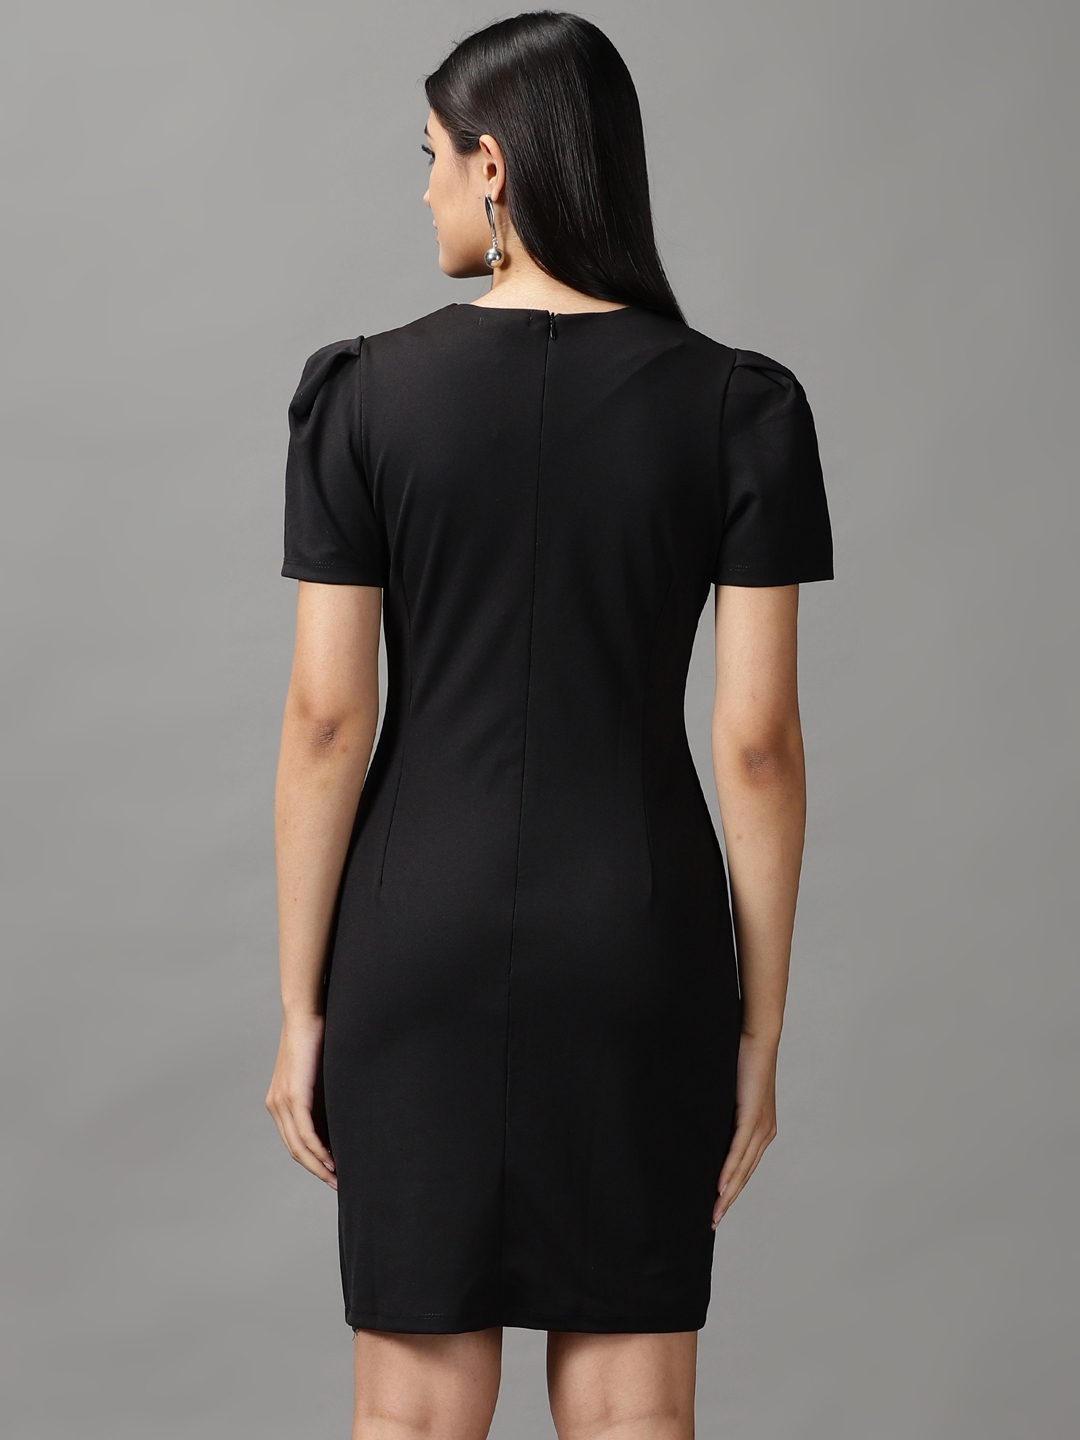 Showoff | SHOWOFF Women Black Solid Round Neck Short Sleeves Above Knee Bodycon Dress 3